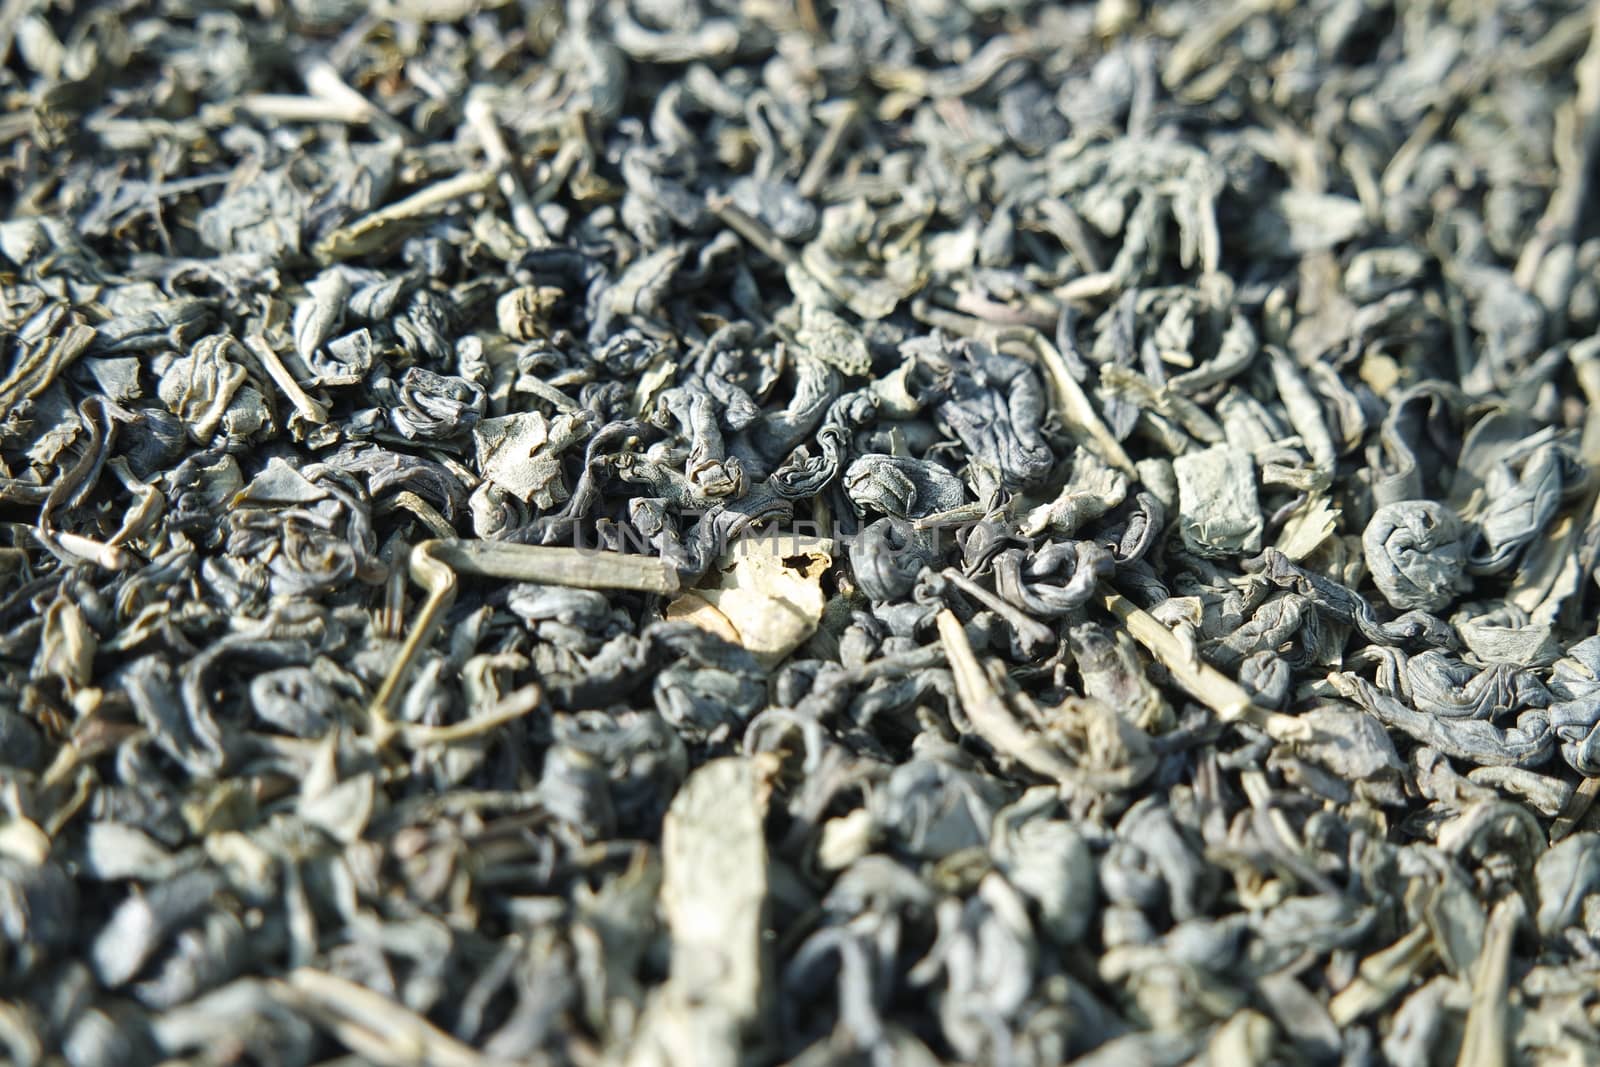 Close-up view of green tea dried leaves or stevia rebaudiana by Photochowk